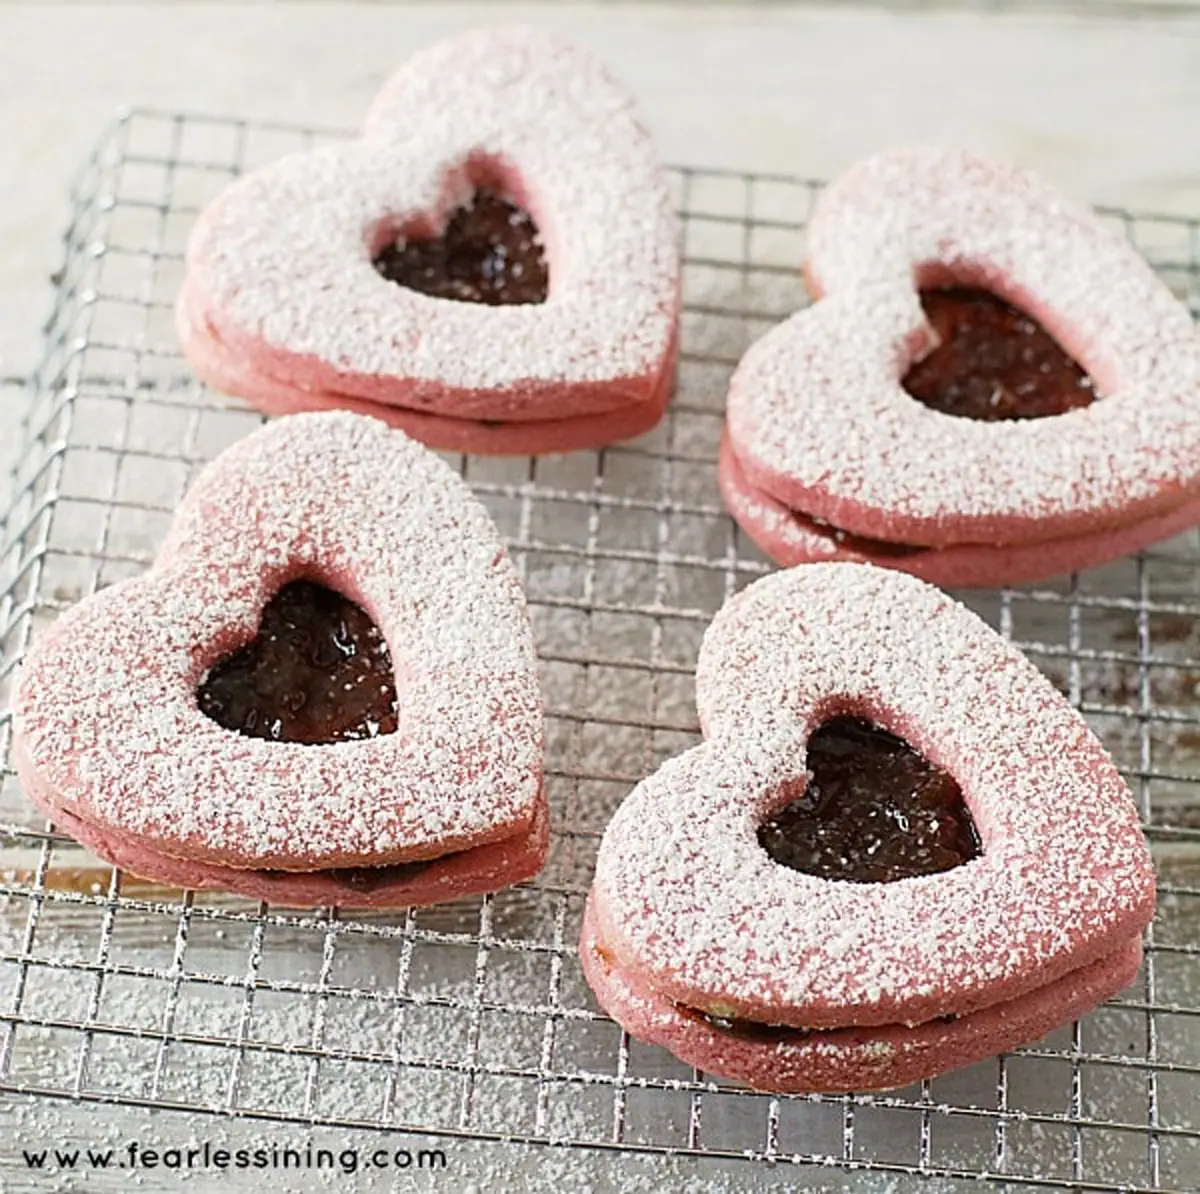 powdered sugared dusted linzer cookies on a rack